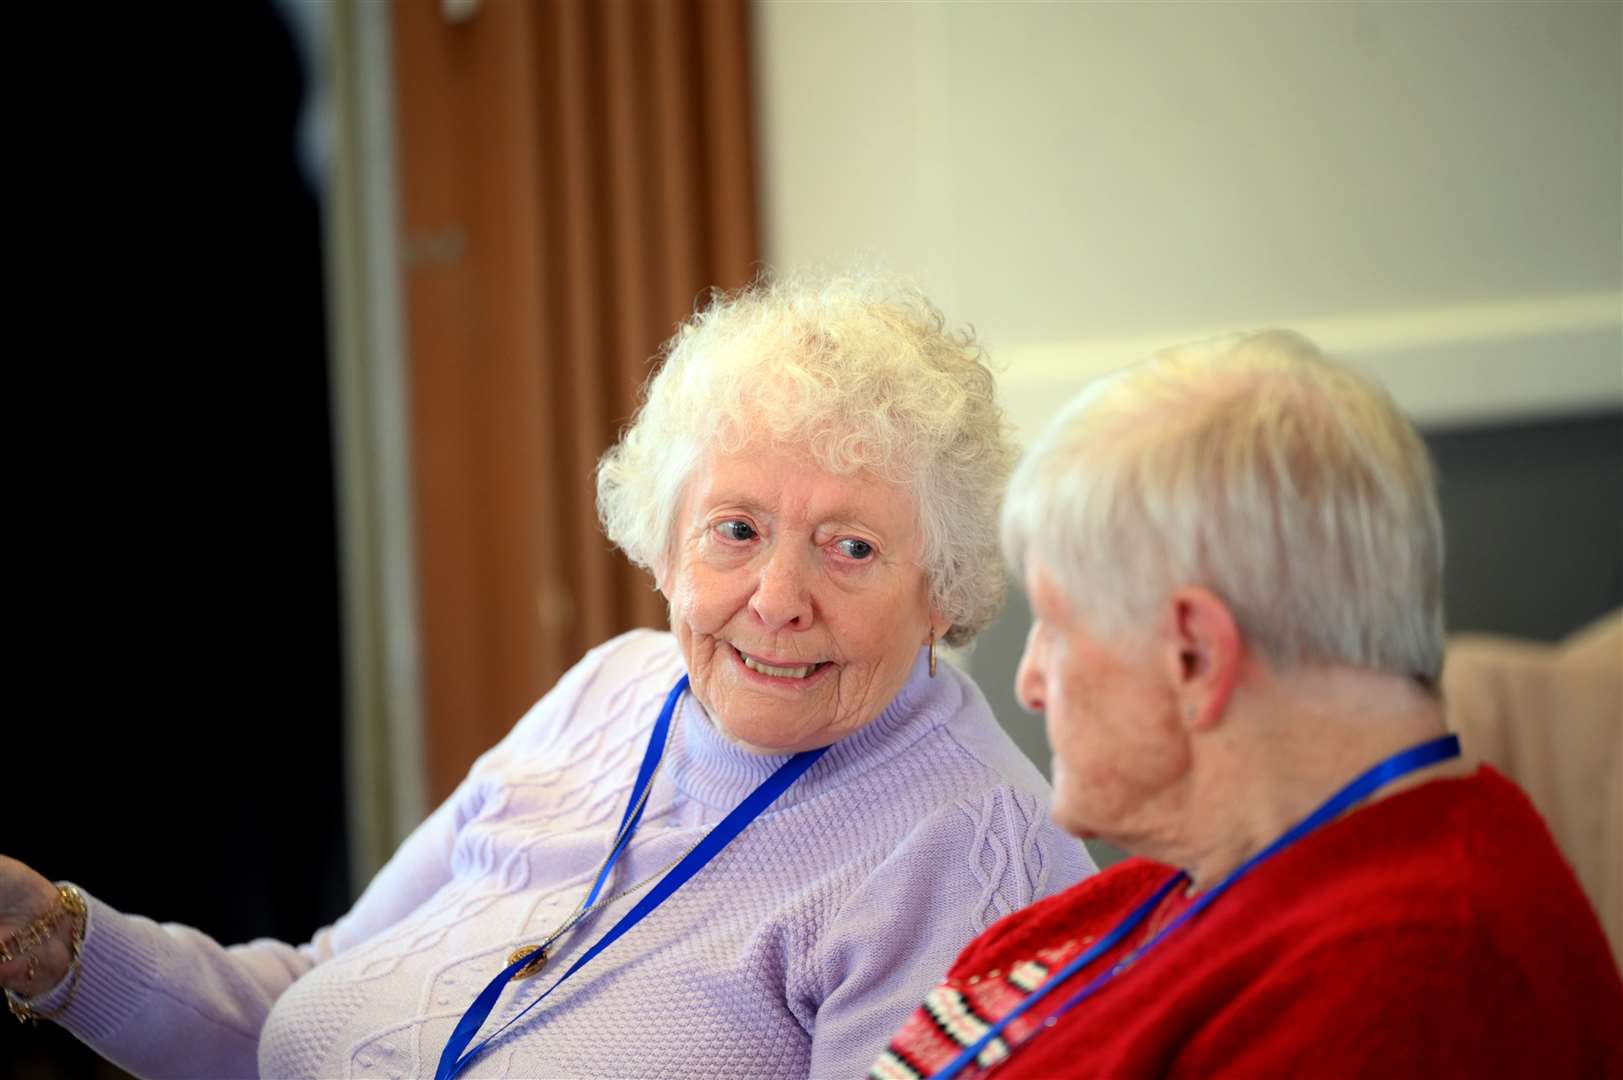 Forget-me-knot lunch club at Gaywood Church Rooms celebrating 56th birthday. (63273665)